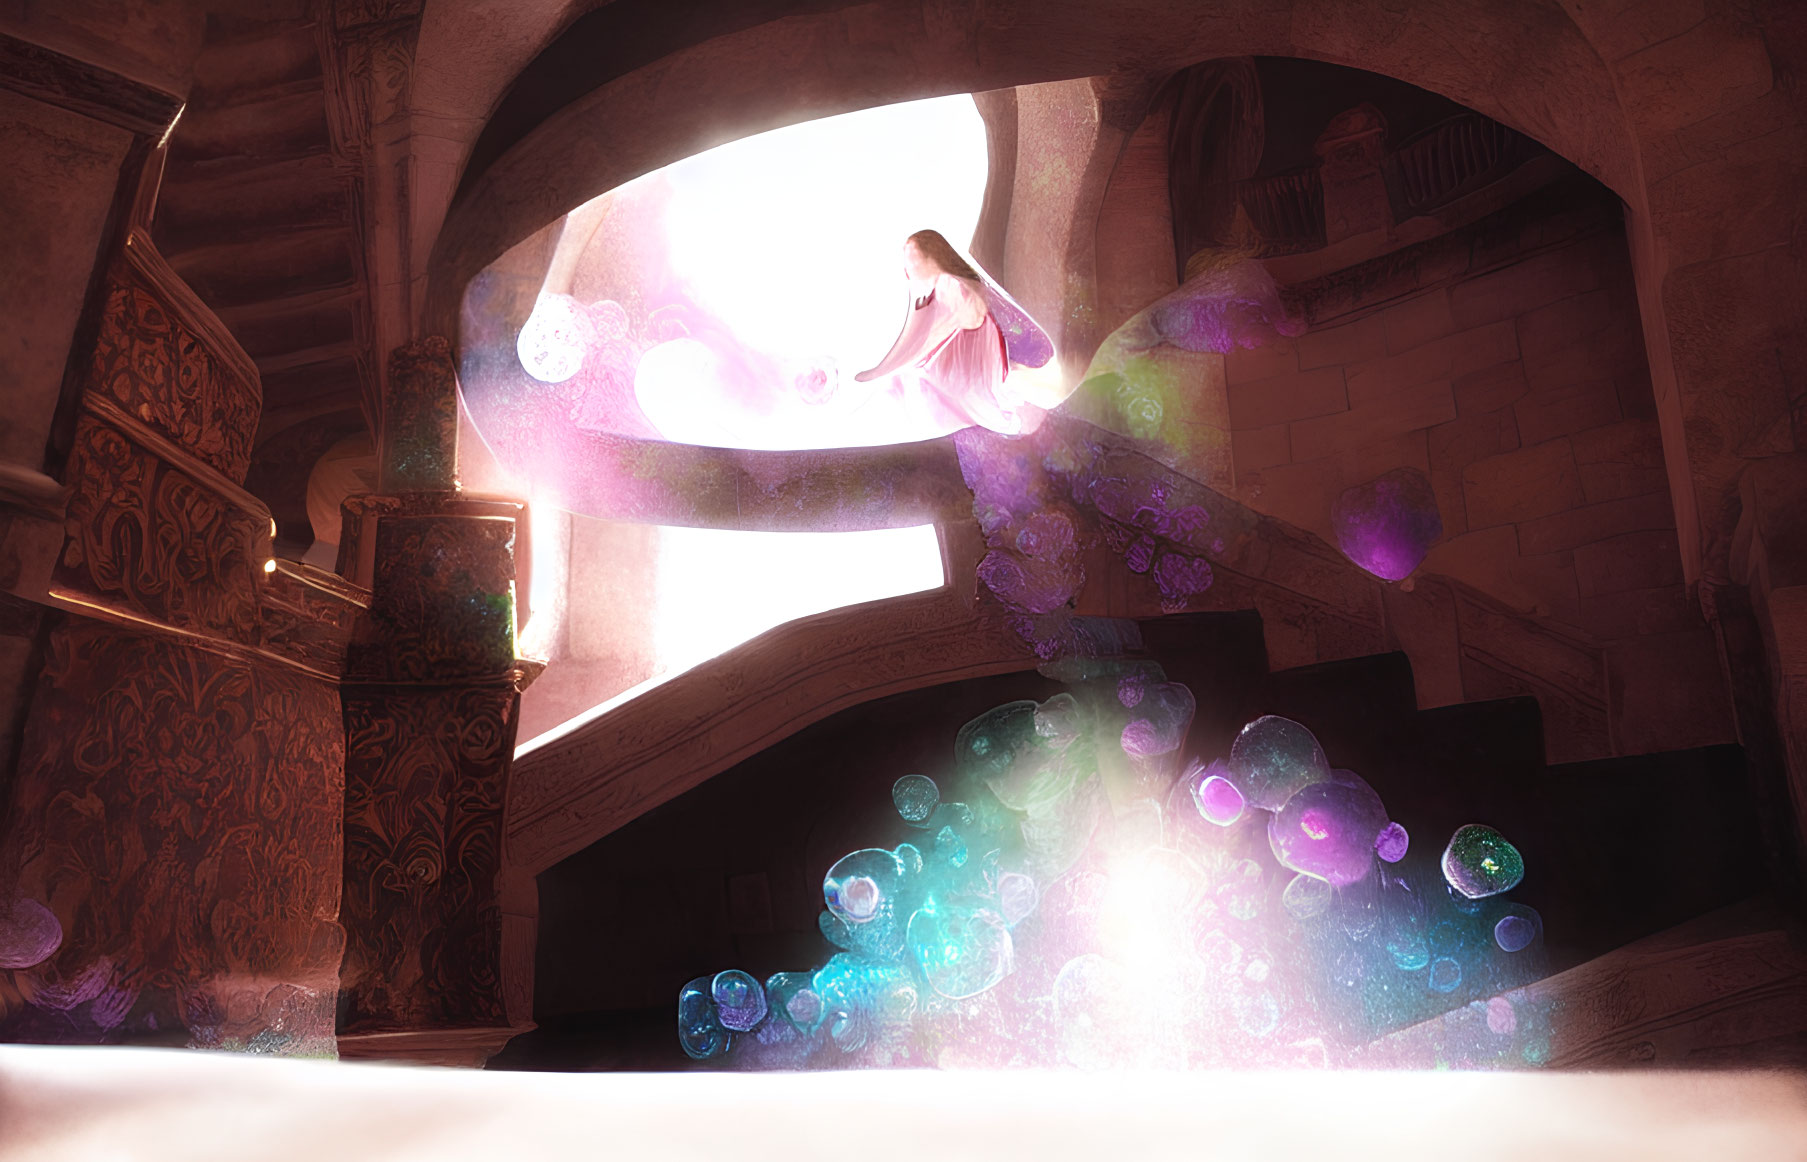 Woman on illuminated staircase surrounded by glowing orbs in ancient building interior.